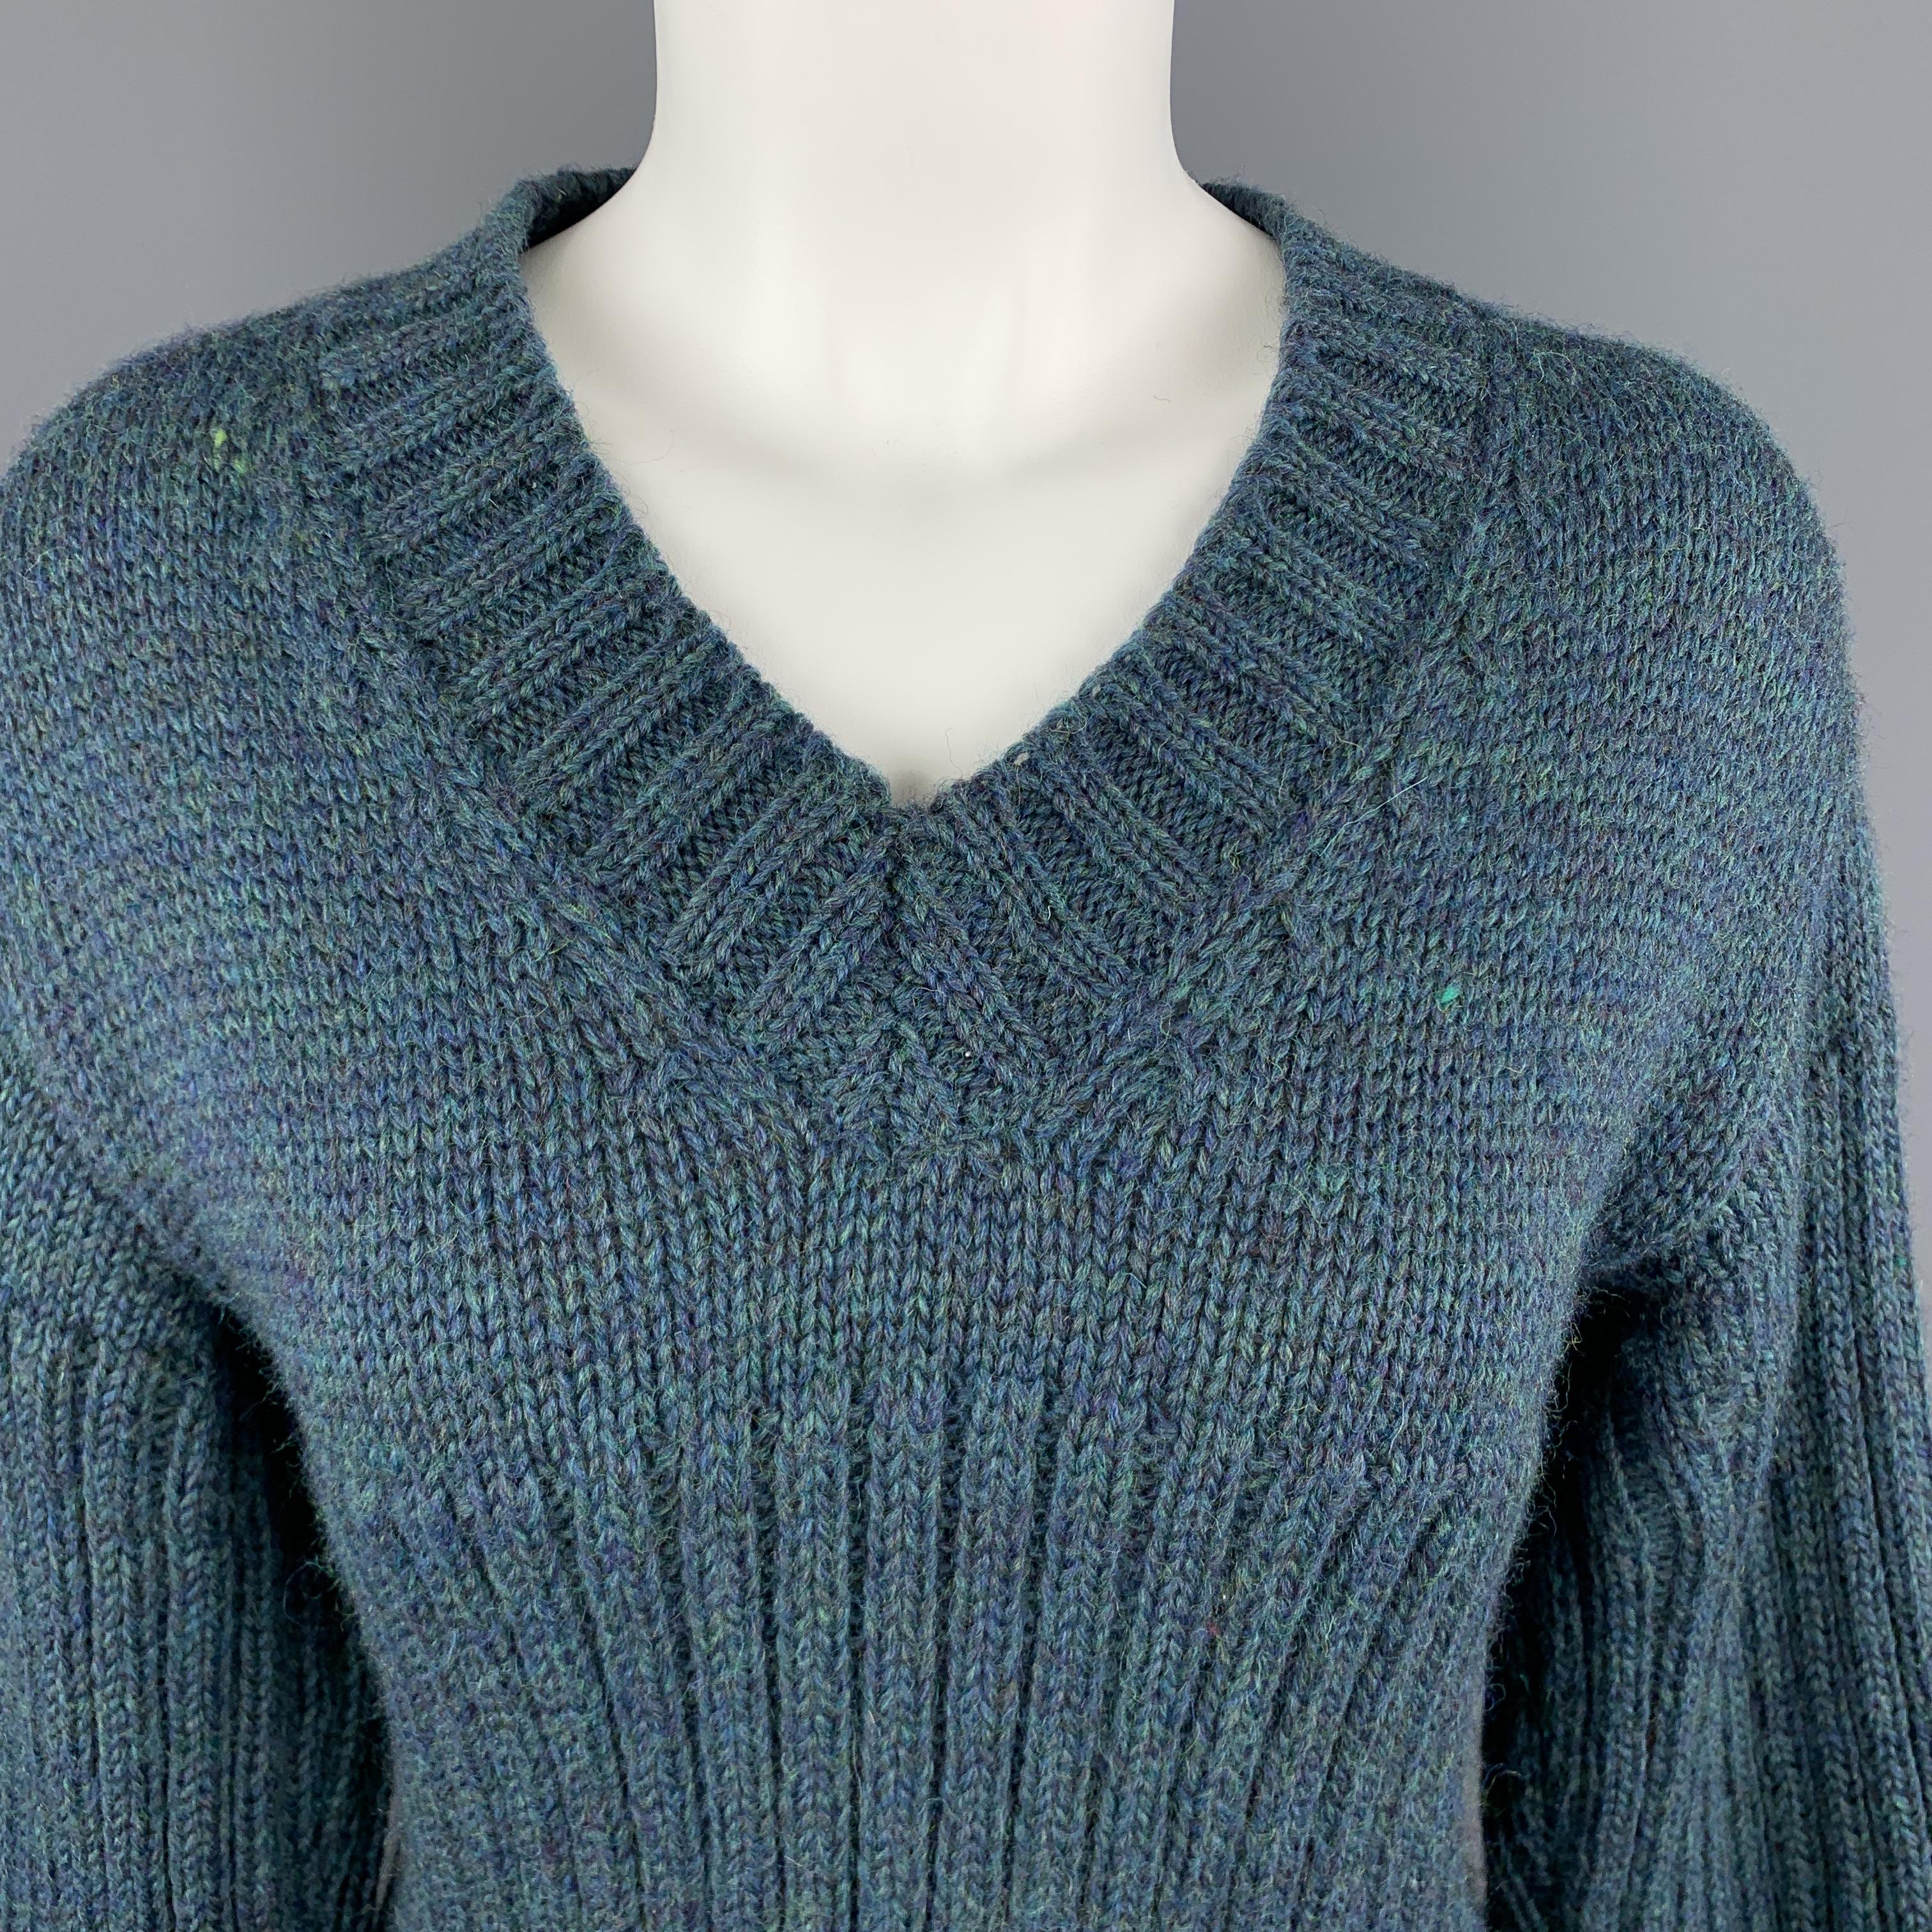 COMME des GARCONS SHIRT pullover sweater comes in heathered teal blue wool knit with a V neck, ribbed mid section. and grey whipstich hem. Made in Ireland.

Excellent Pre-Owned Condition.
Marked: S

Measurements:

Shoulder: 19 in.
Bust: 36